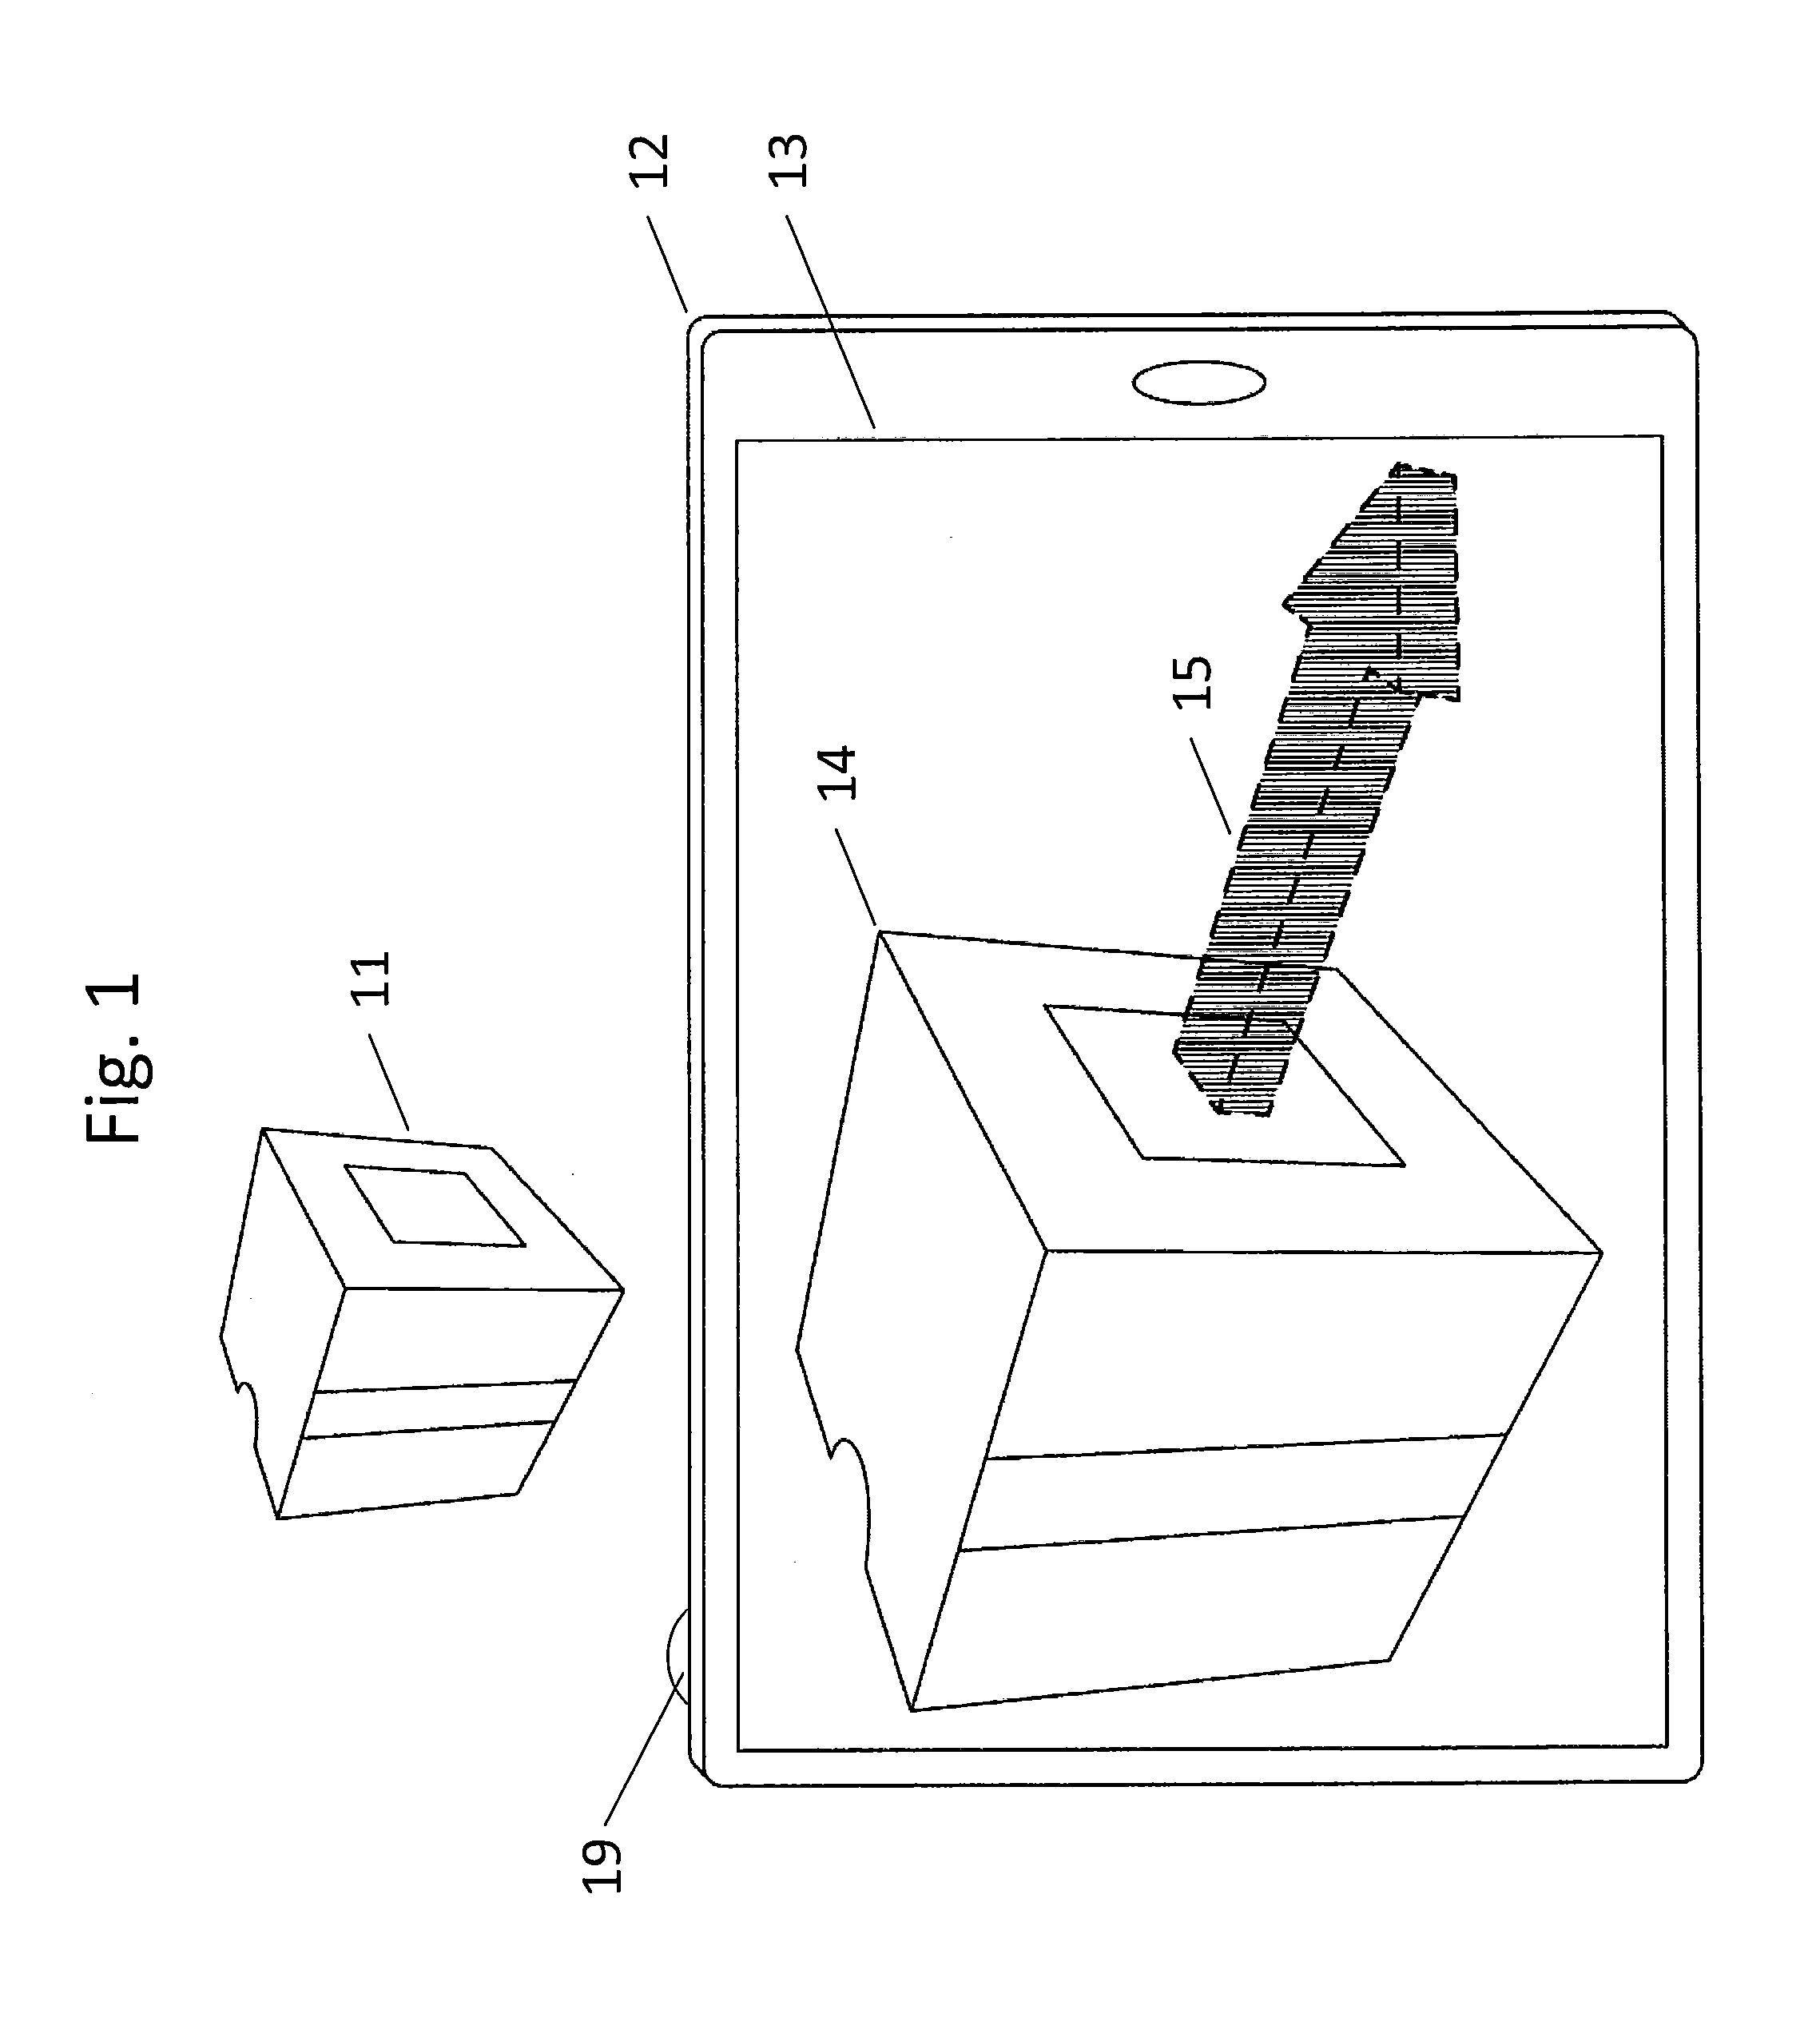 Method and system for providing information associated with a view of a real environment superimposed with a virtual object